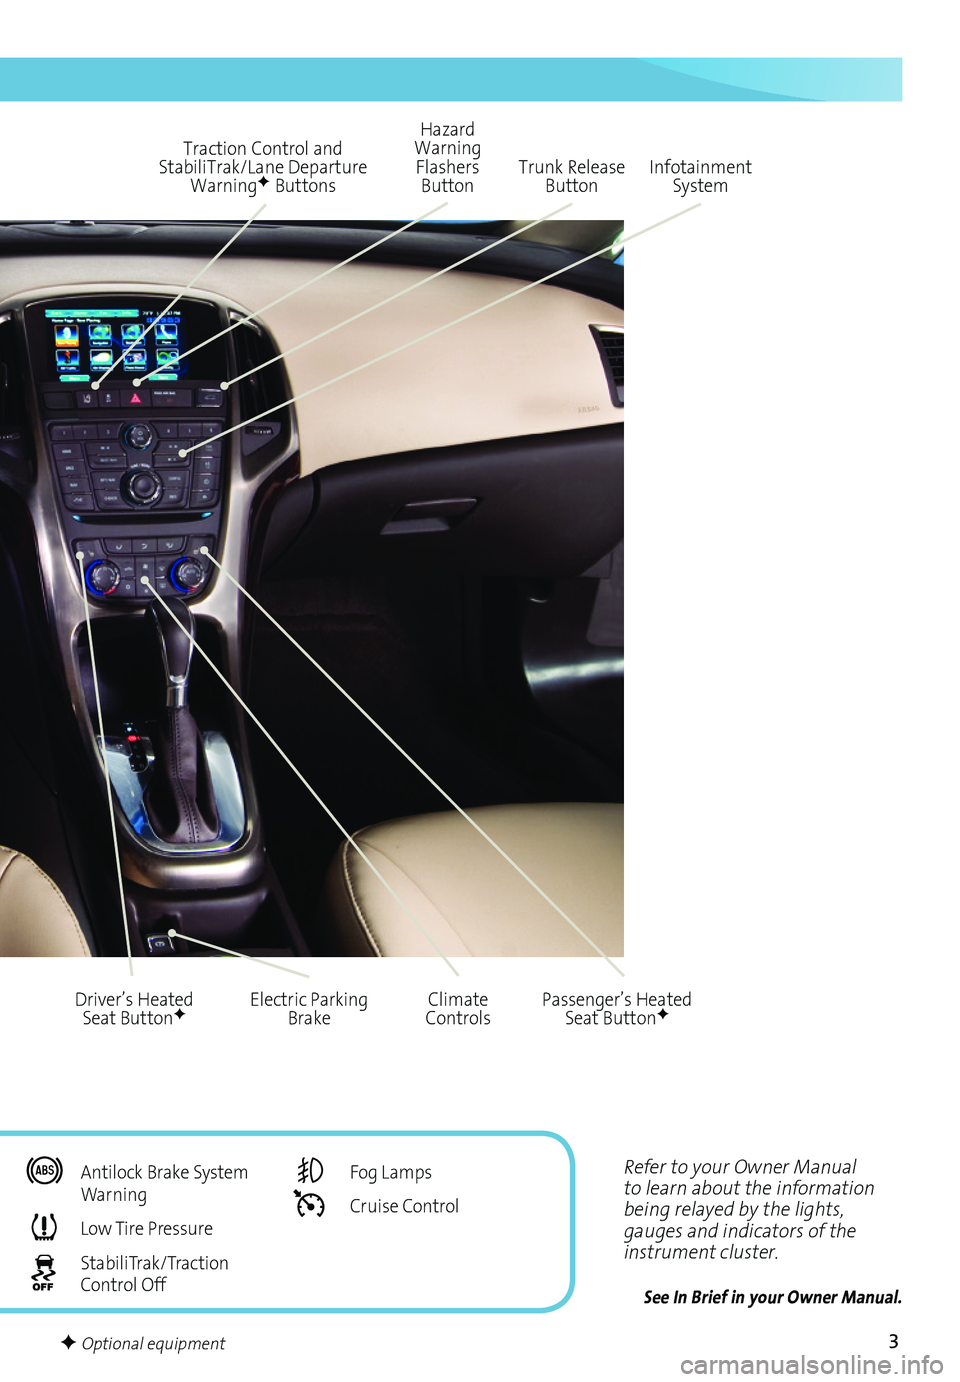 BUICK VERANO 2017  Get To Know Guide 3
Refer to your Owner Manual to learn about the information being relayed by the lights, gauges and indicators of the instrument cluster.
See In Brief in your Owner Manual.
Traction Control and Stabil